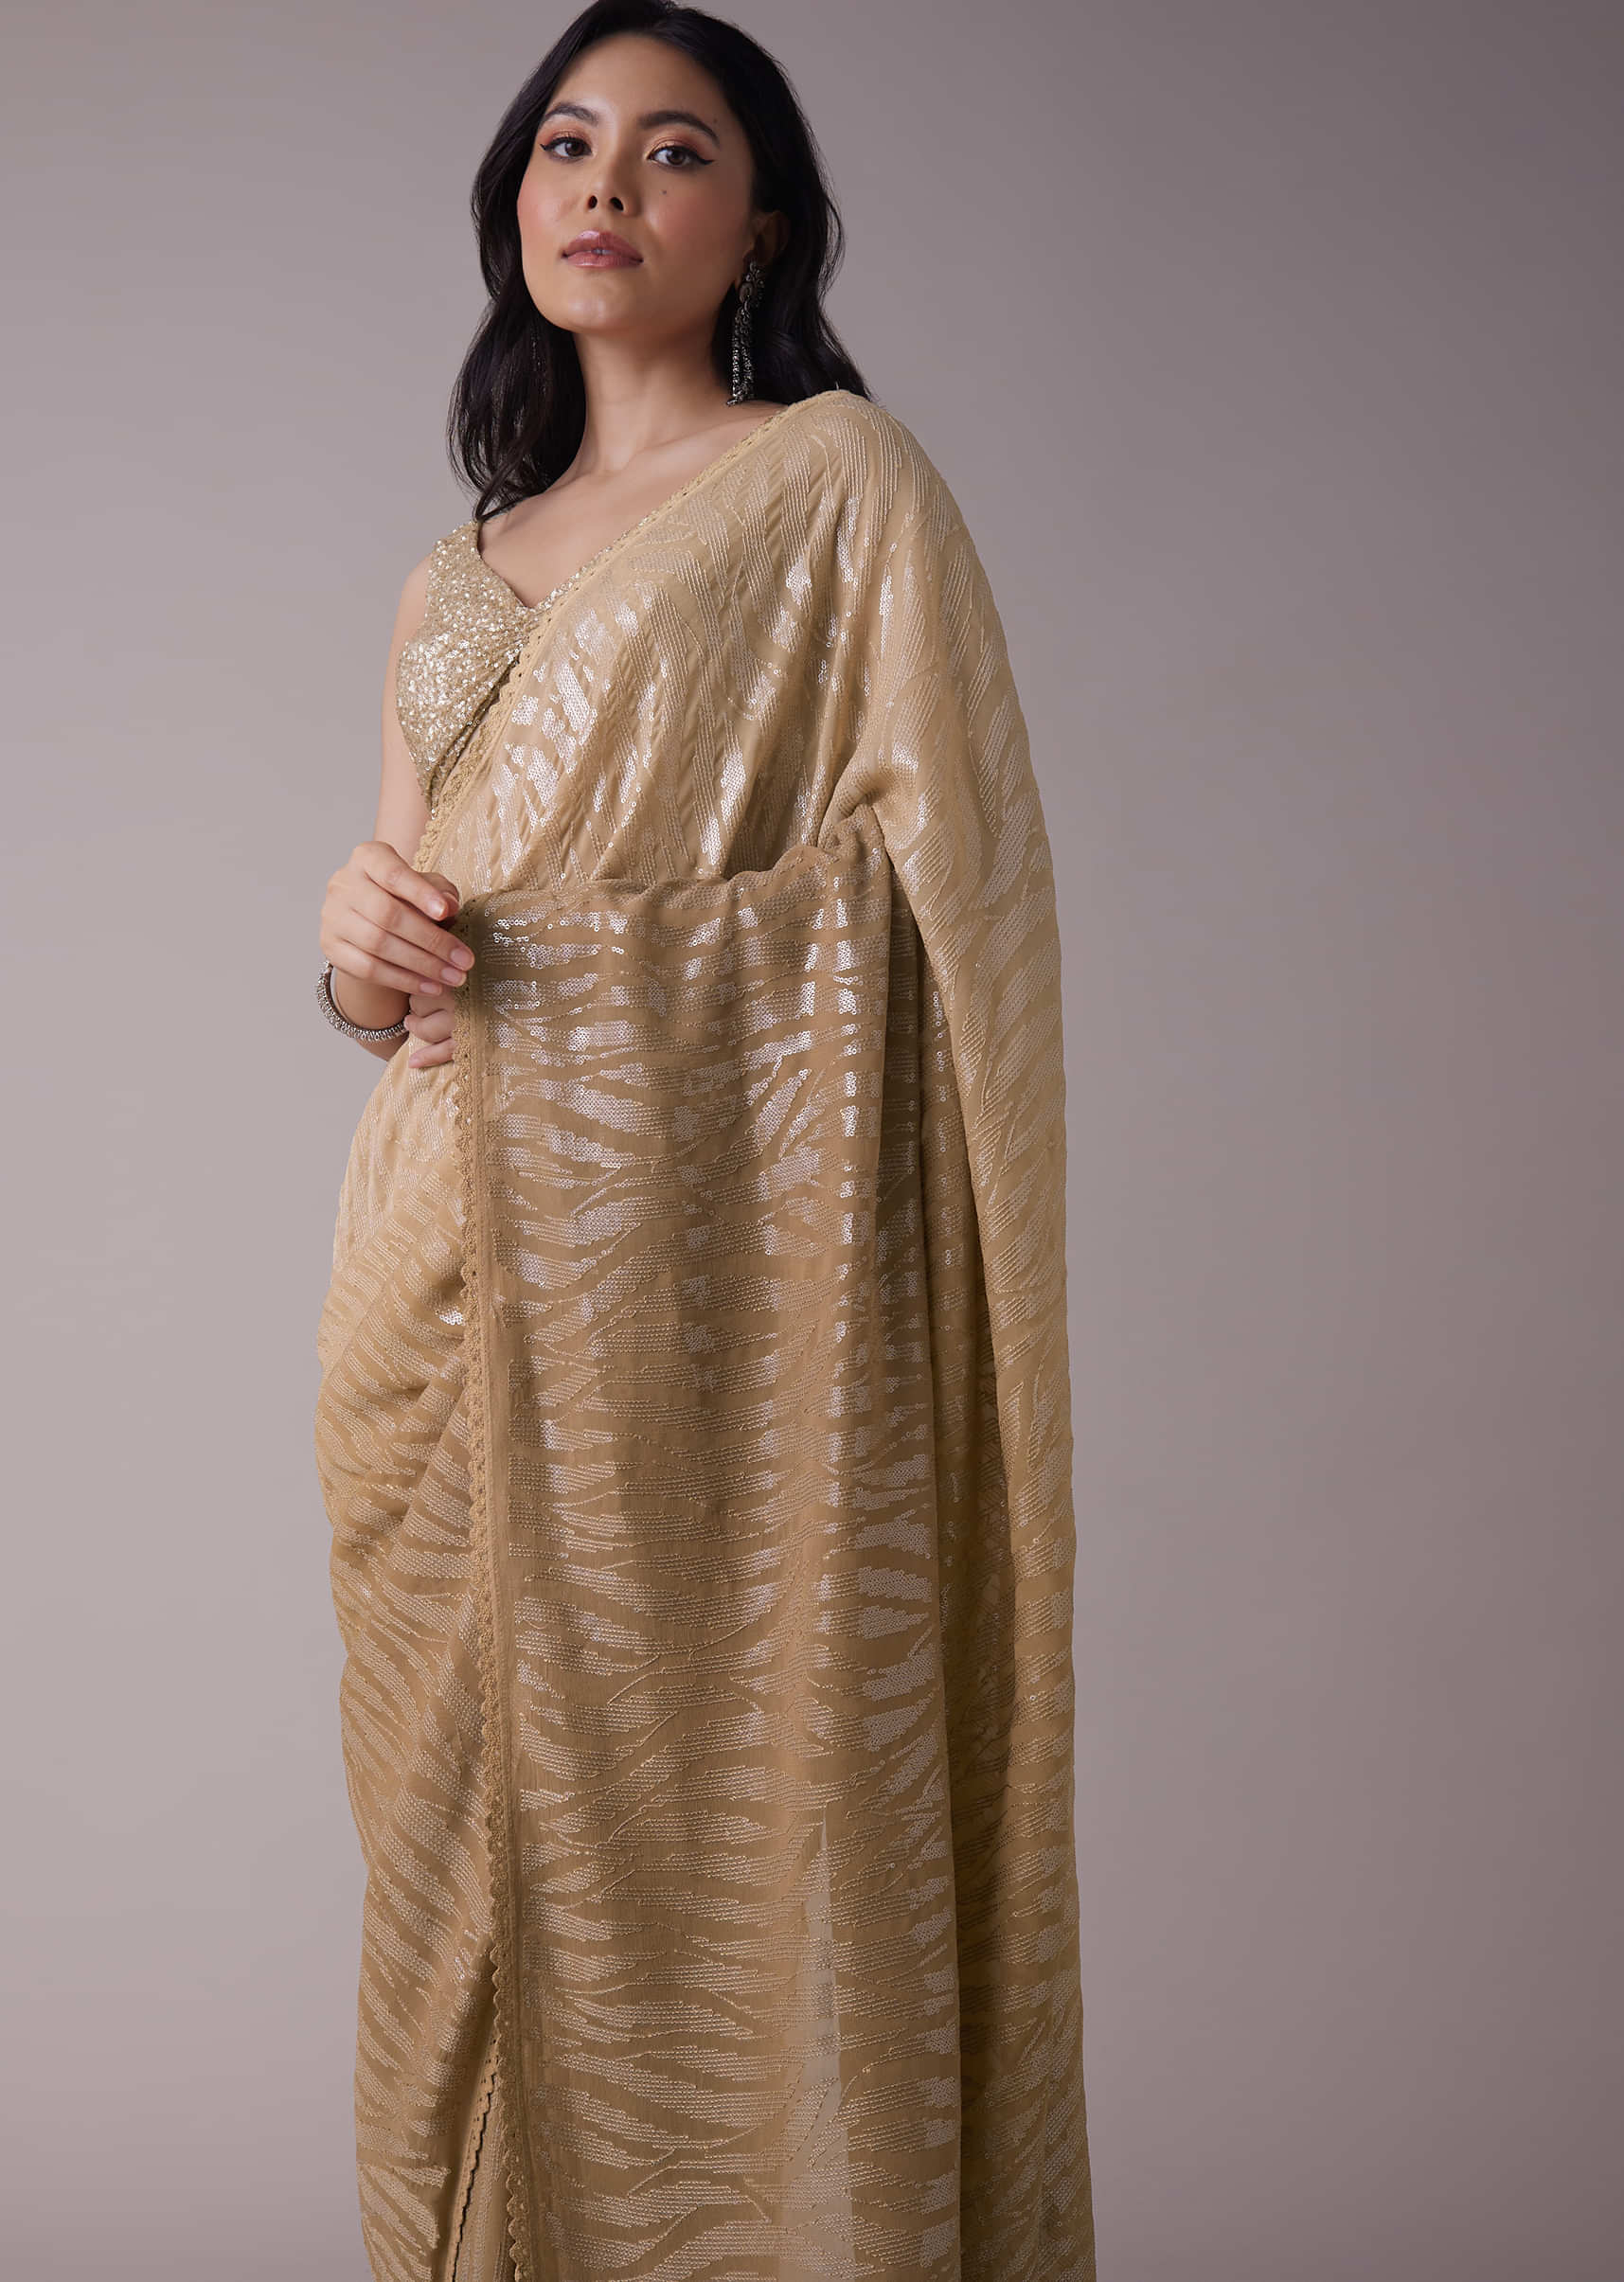 Tan Gold Sequins Embroidered Saree In Georgette With Lacework On The Border